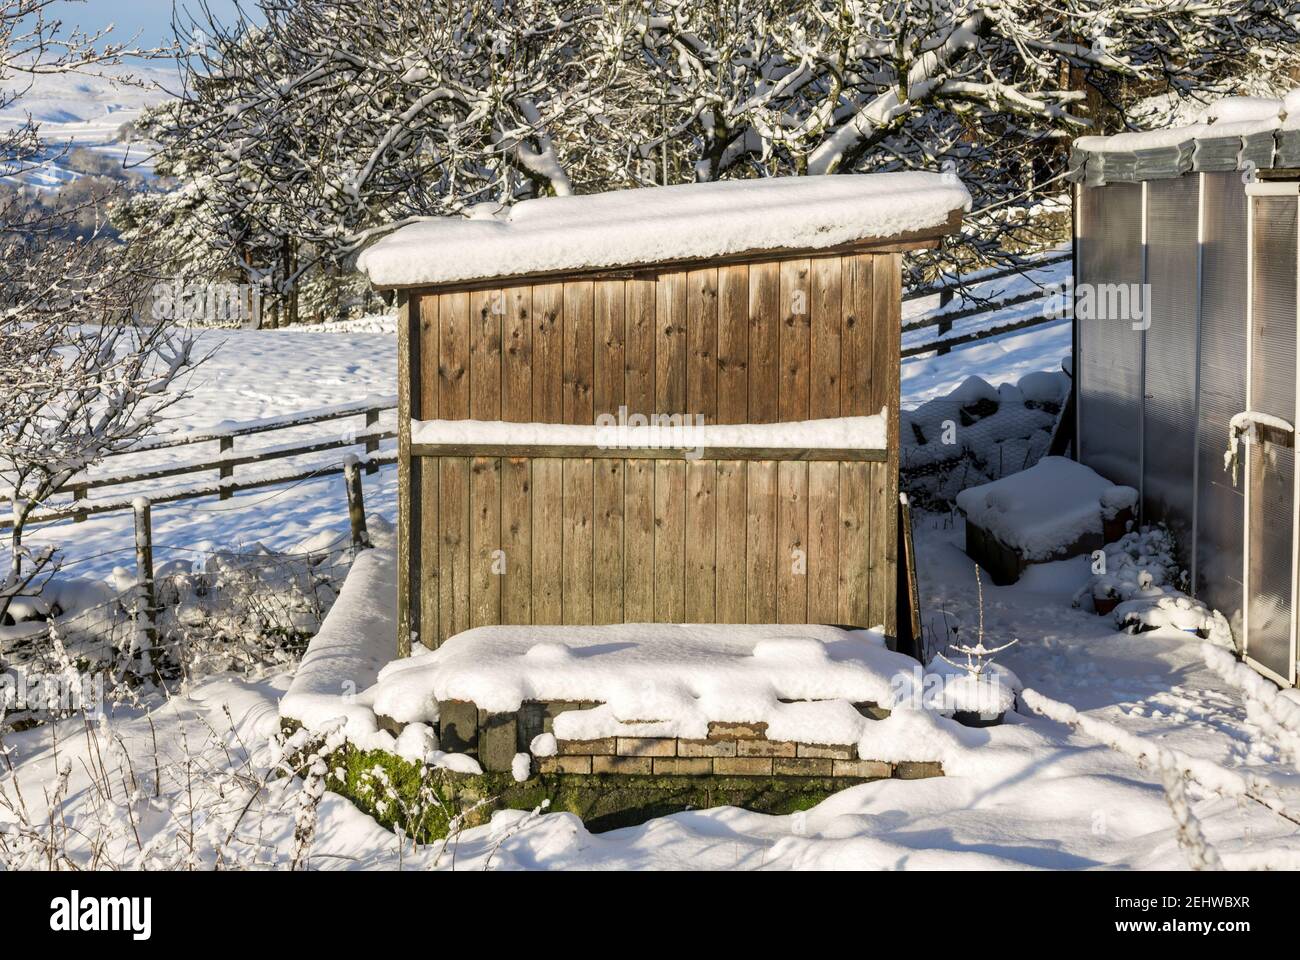 A small wooden stable surrounded by snow Stock Photo